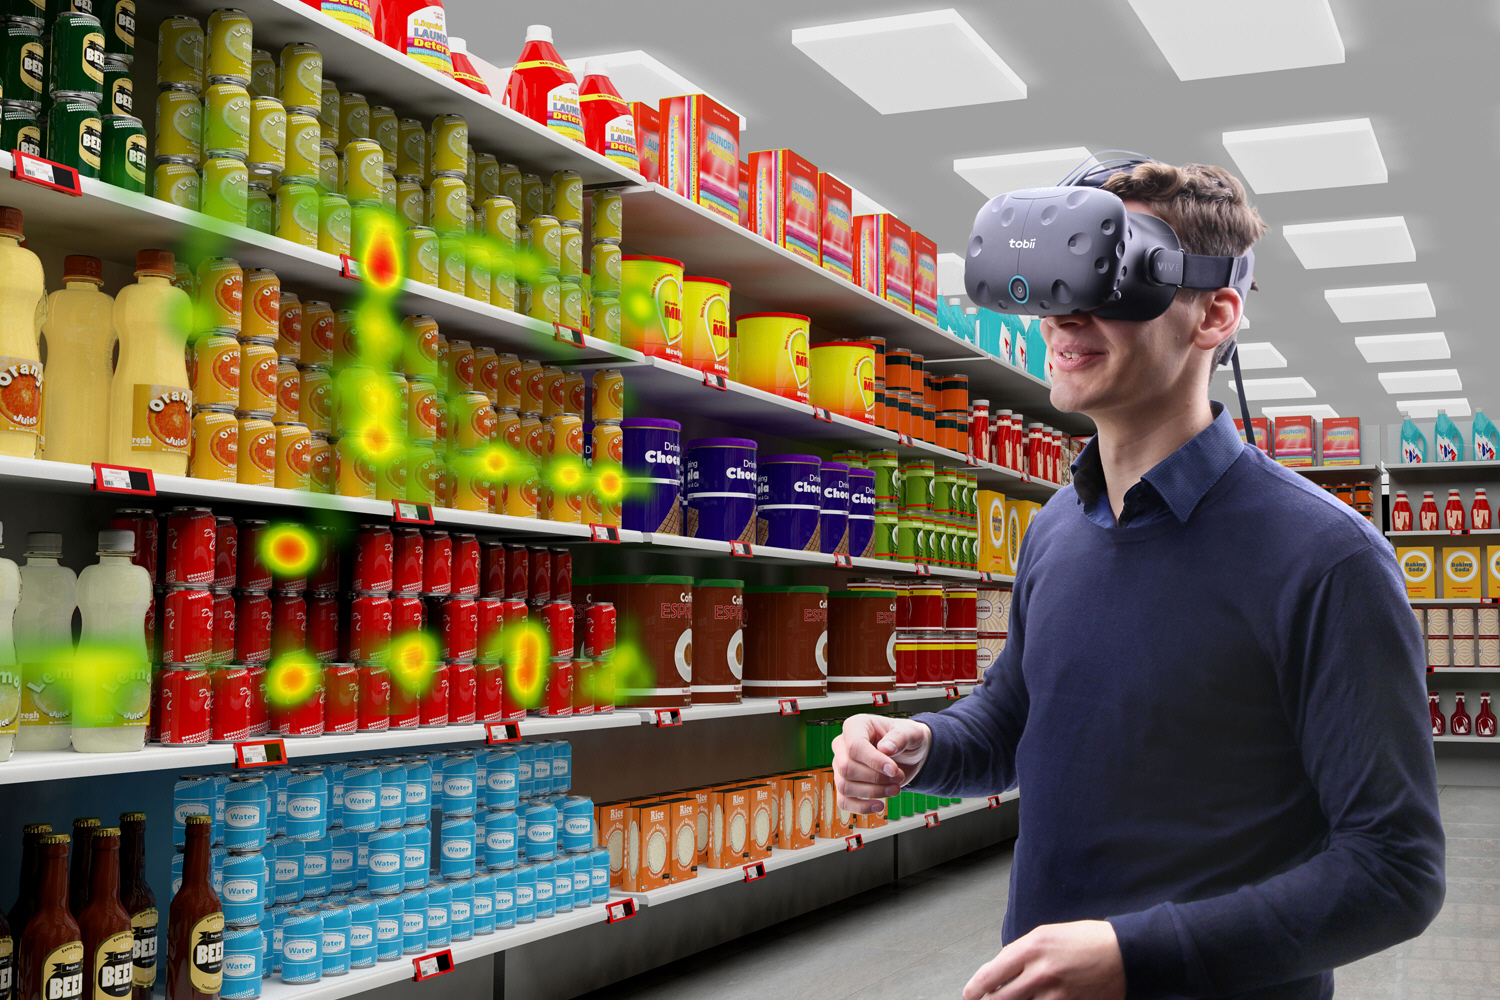 TobiiPro-eye-tracking-integrated-HTC-Vive-shopper-